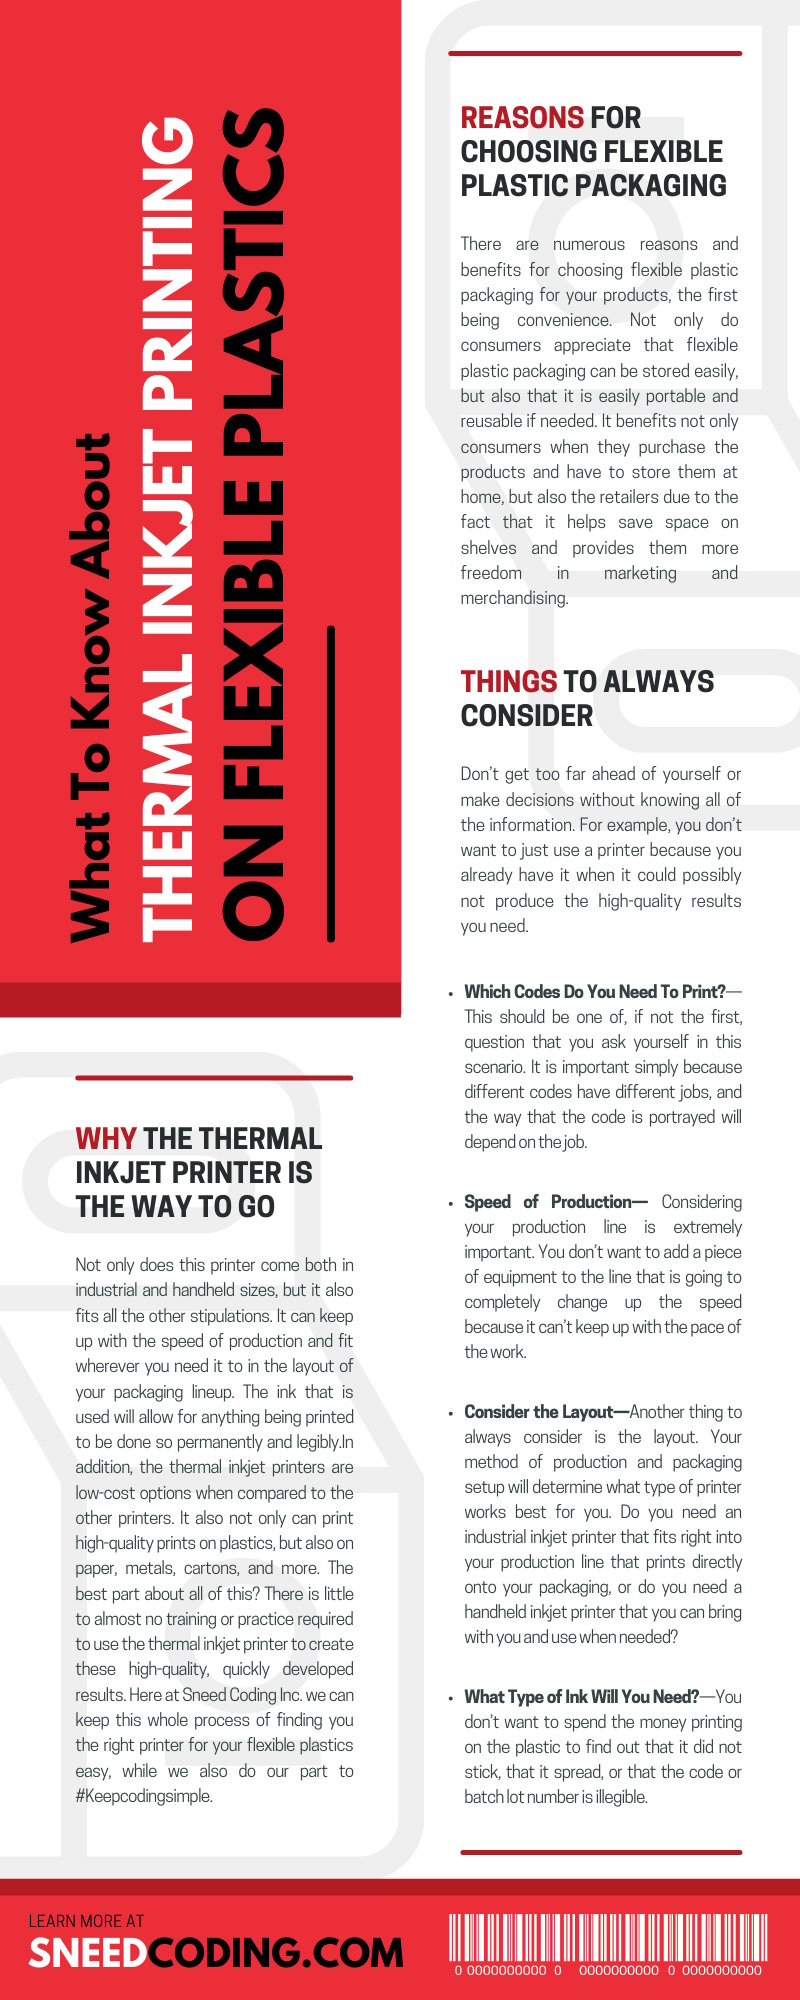 What To Know About Thermal Inkjet Printing on Flexible Plastics